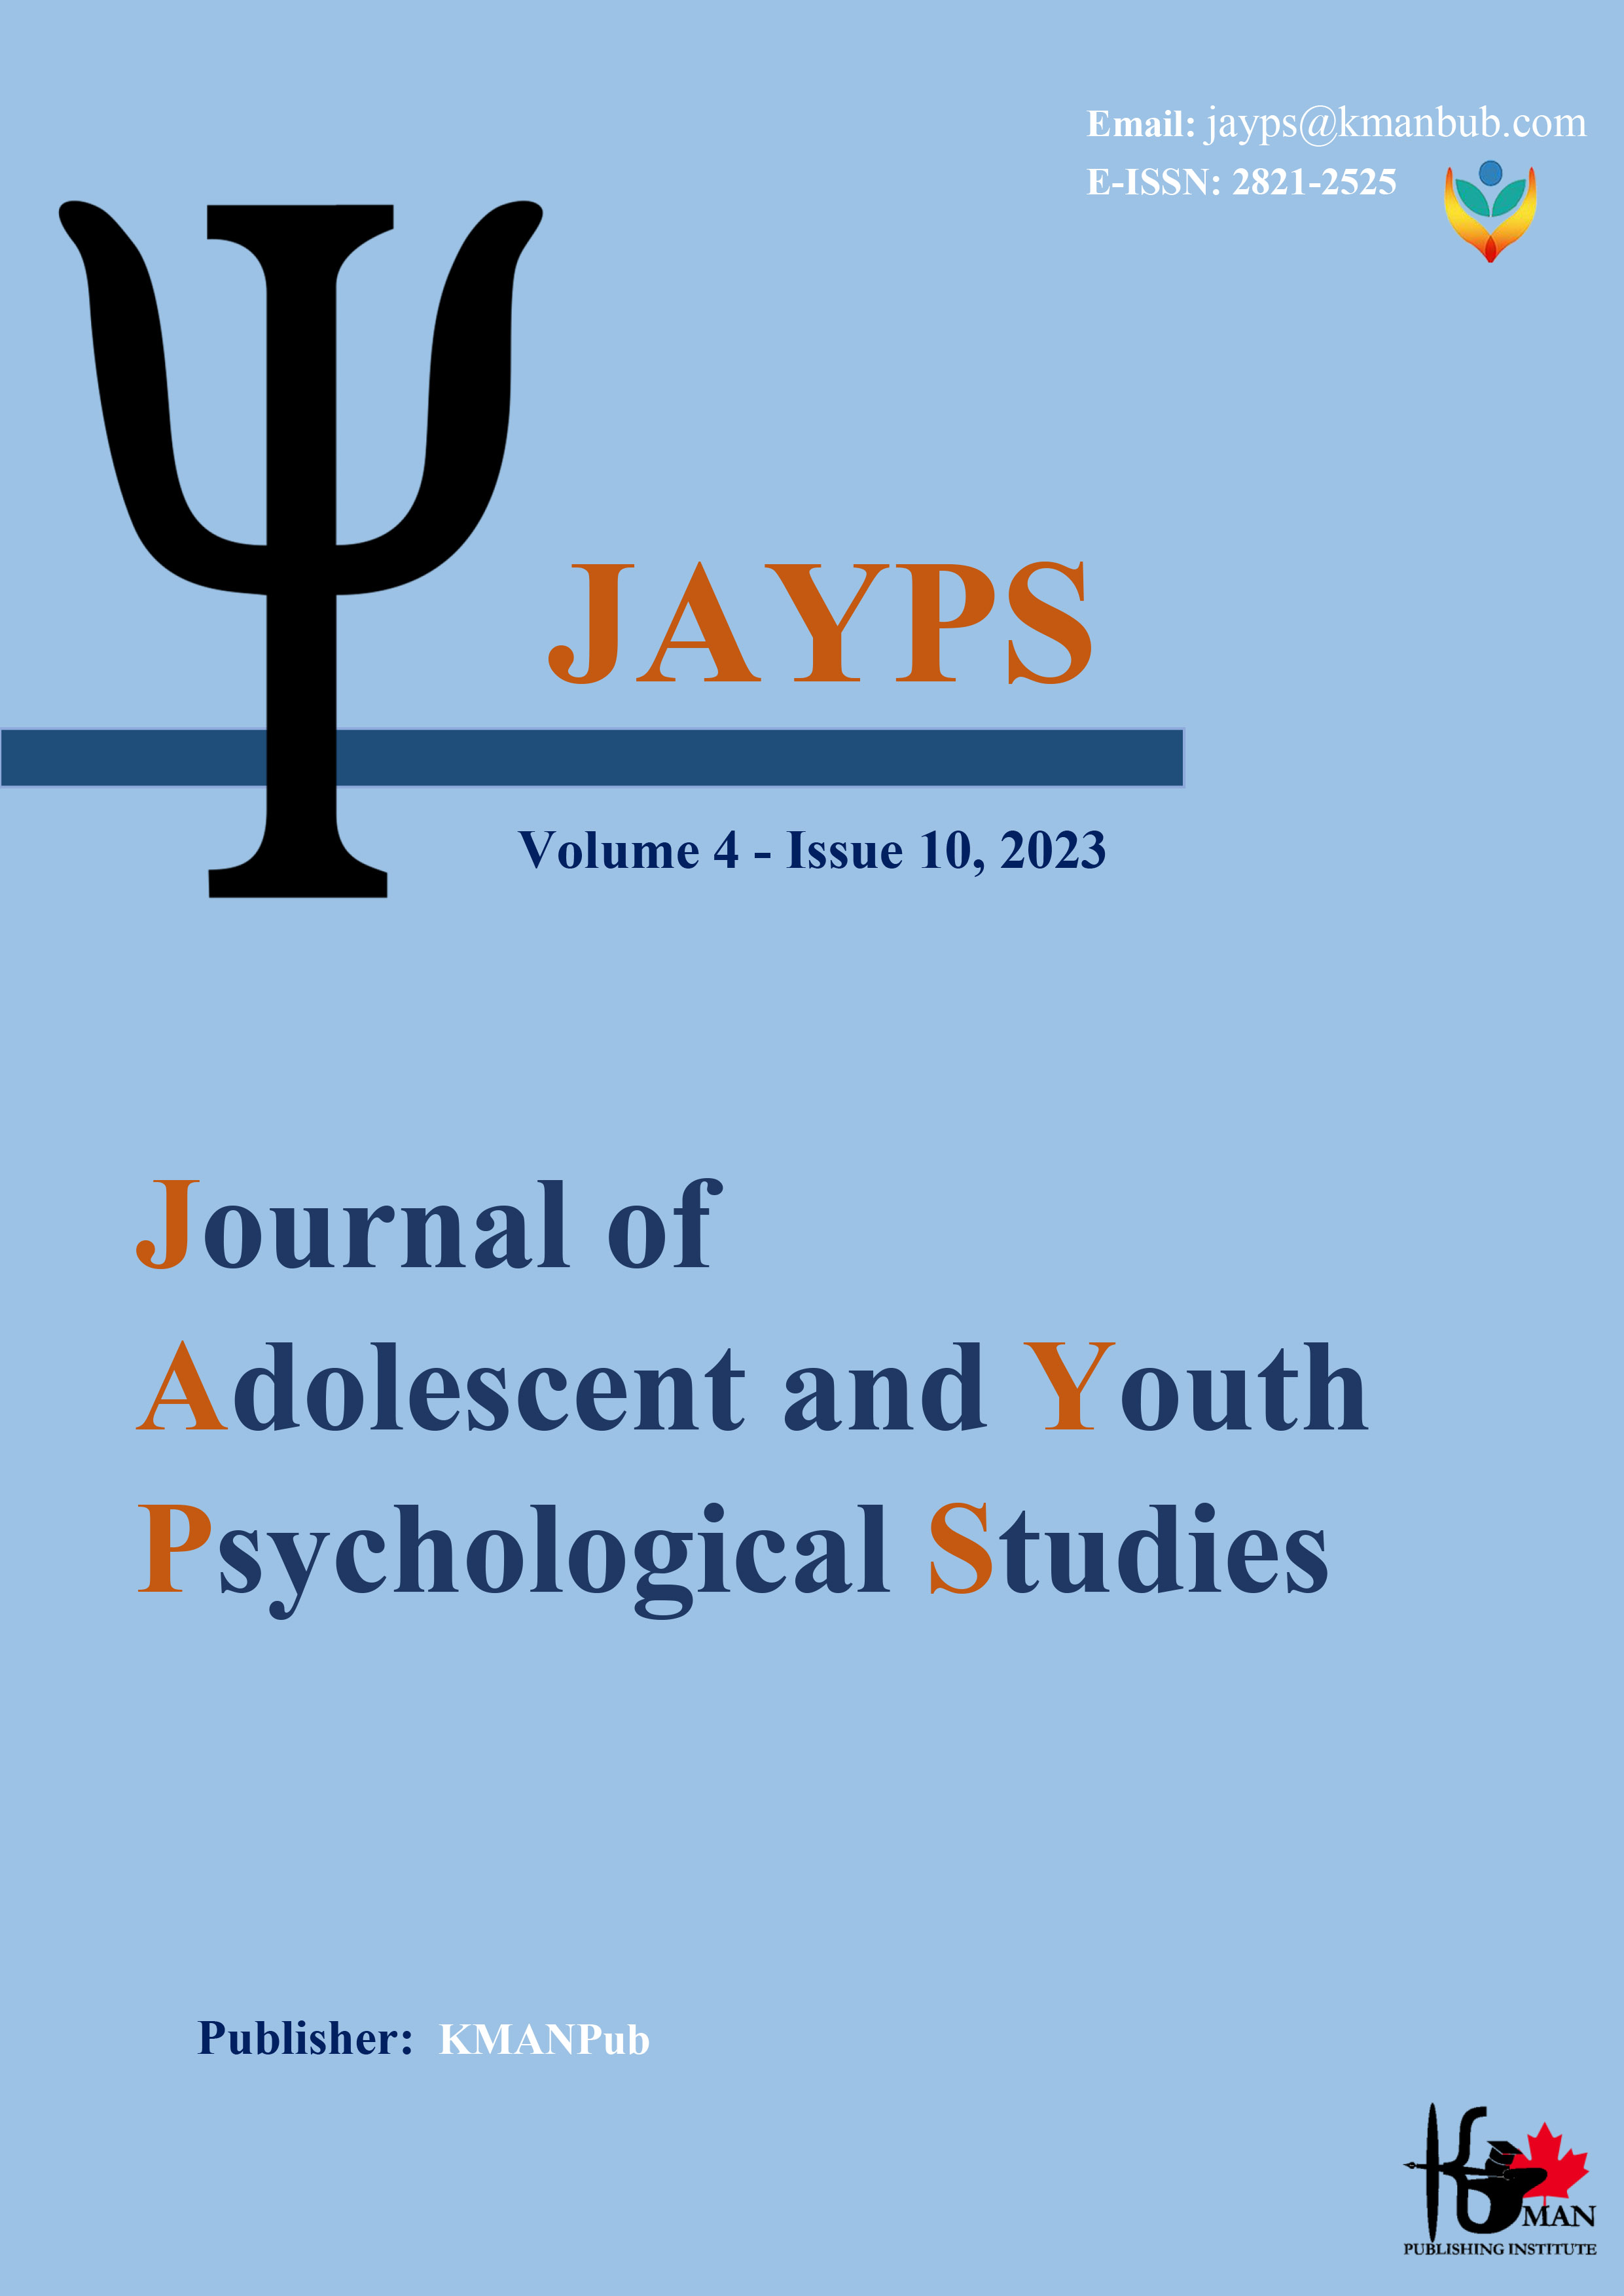 Journal of Adolescent and Youth Psychological Studies (JAYPS)